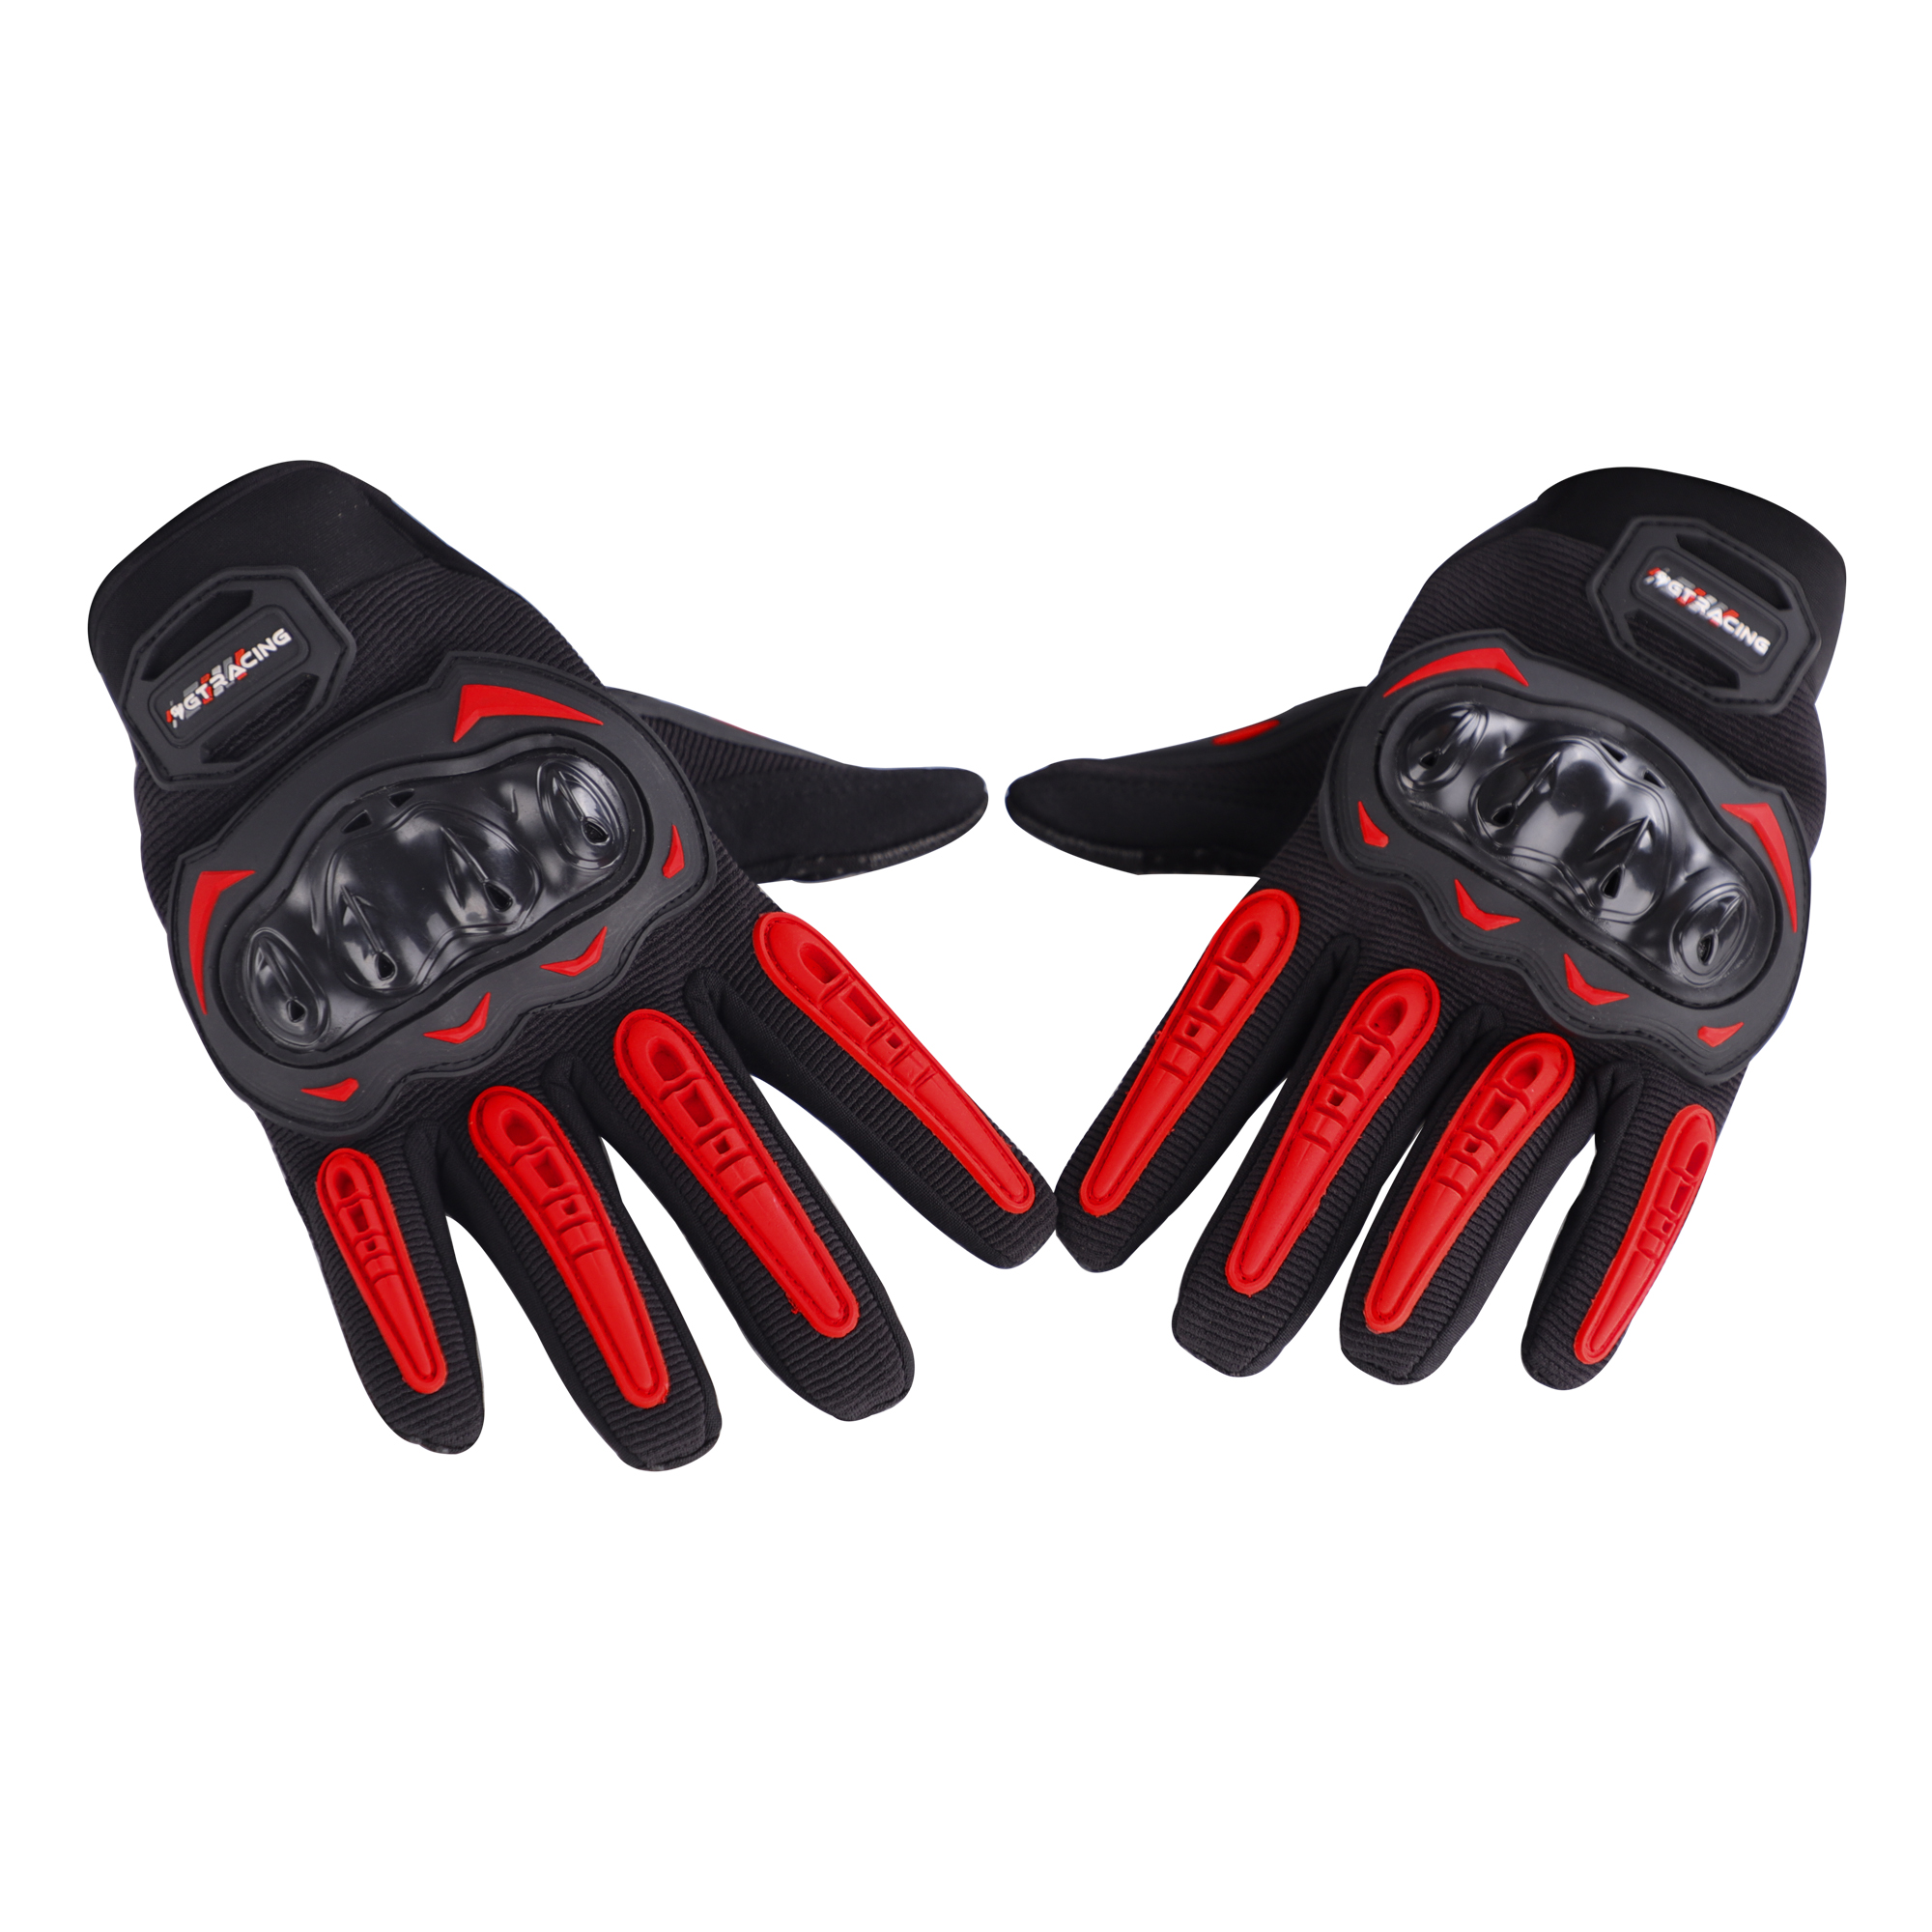 Steelbird GT-17 Full Finger Bike Riding Gloves With Touch Screen Sensitivity At Thumb And Index Finger, Protective Off-Road Motorbike Racing (Red)